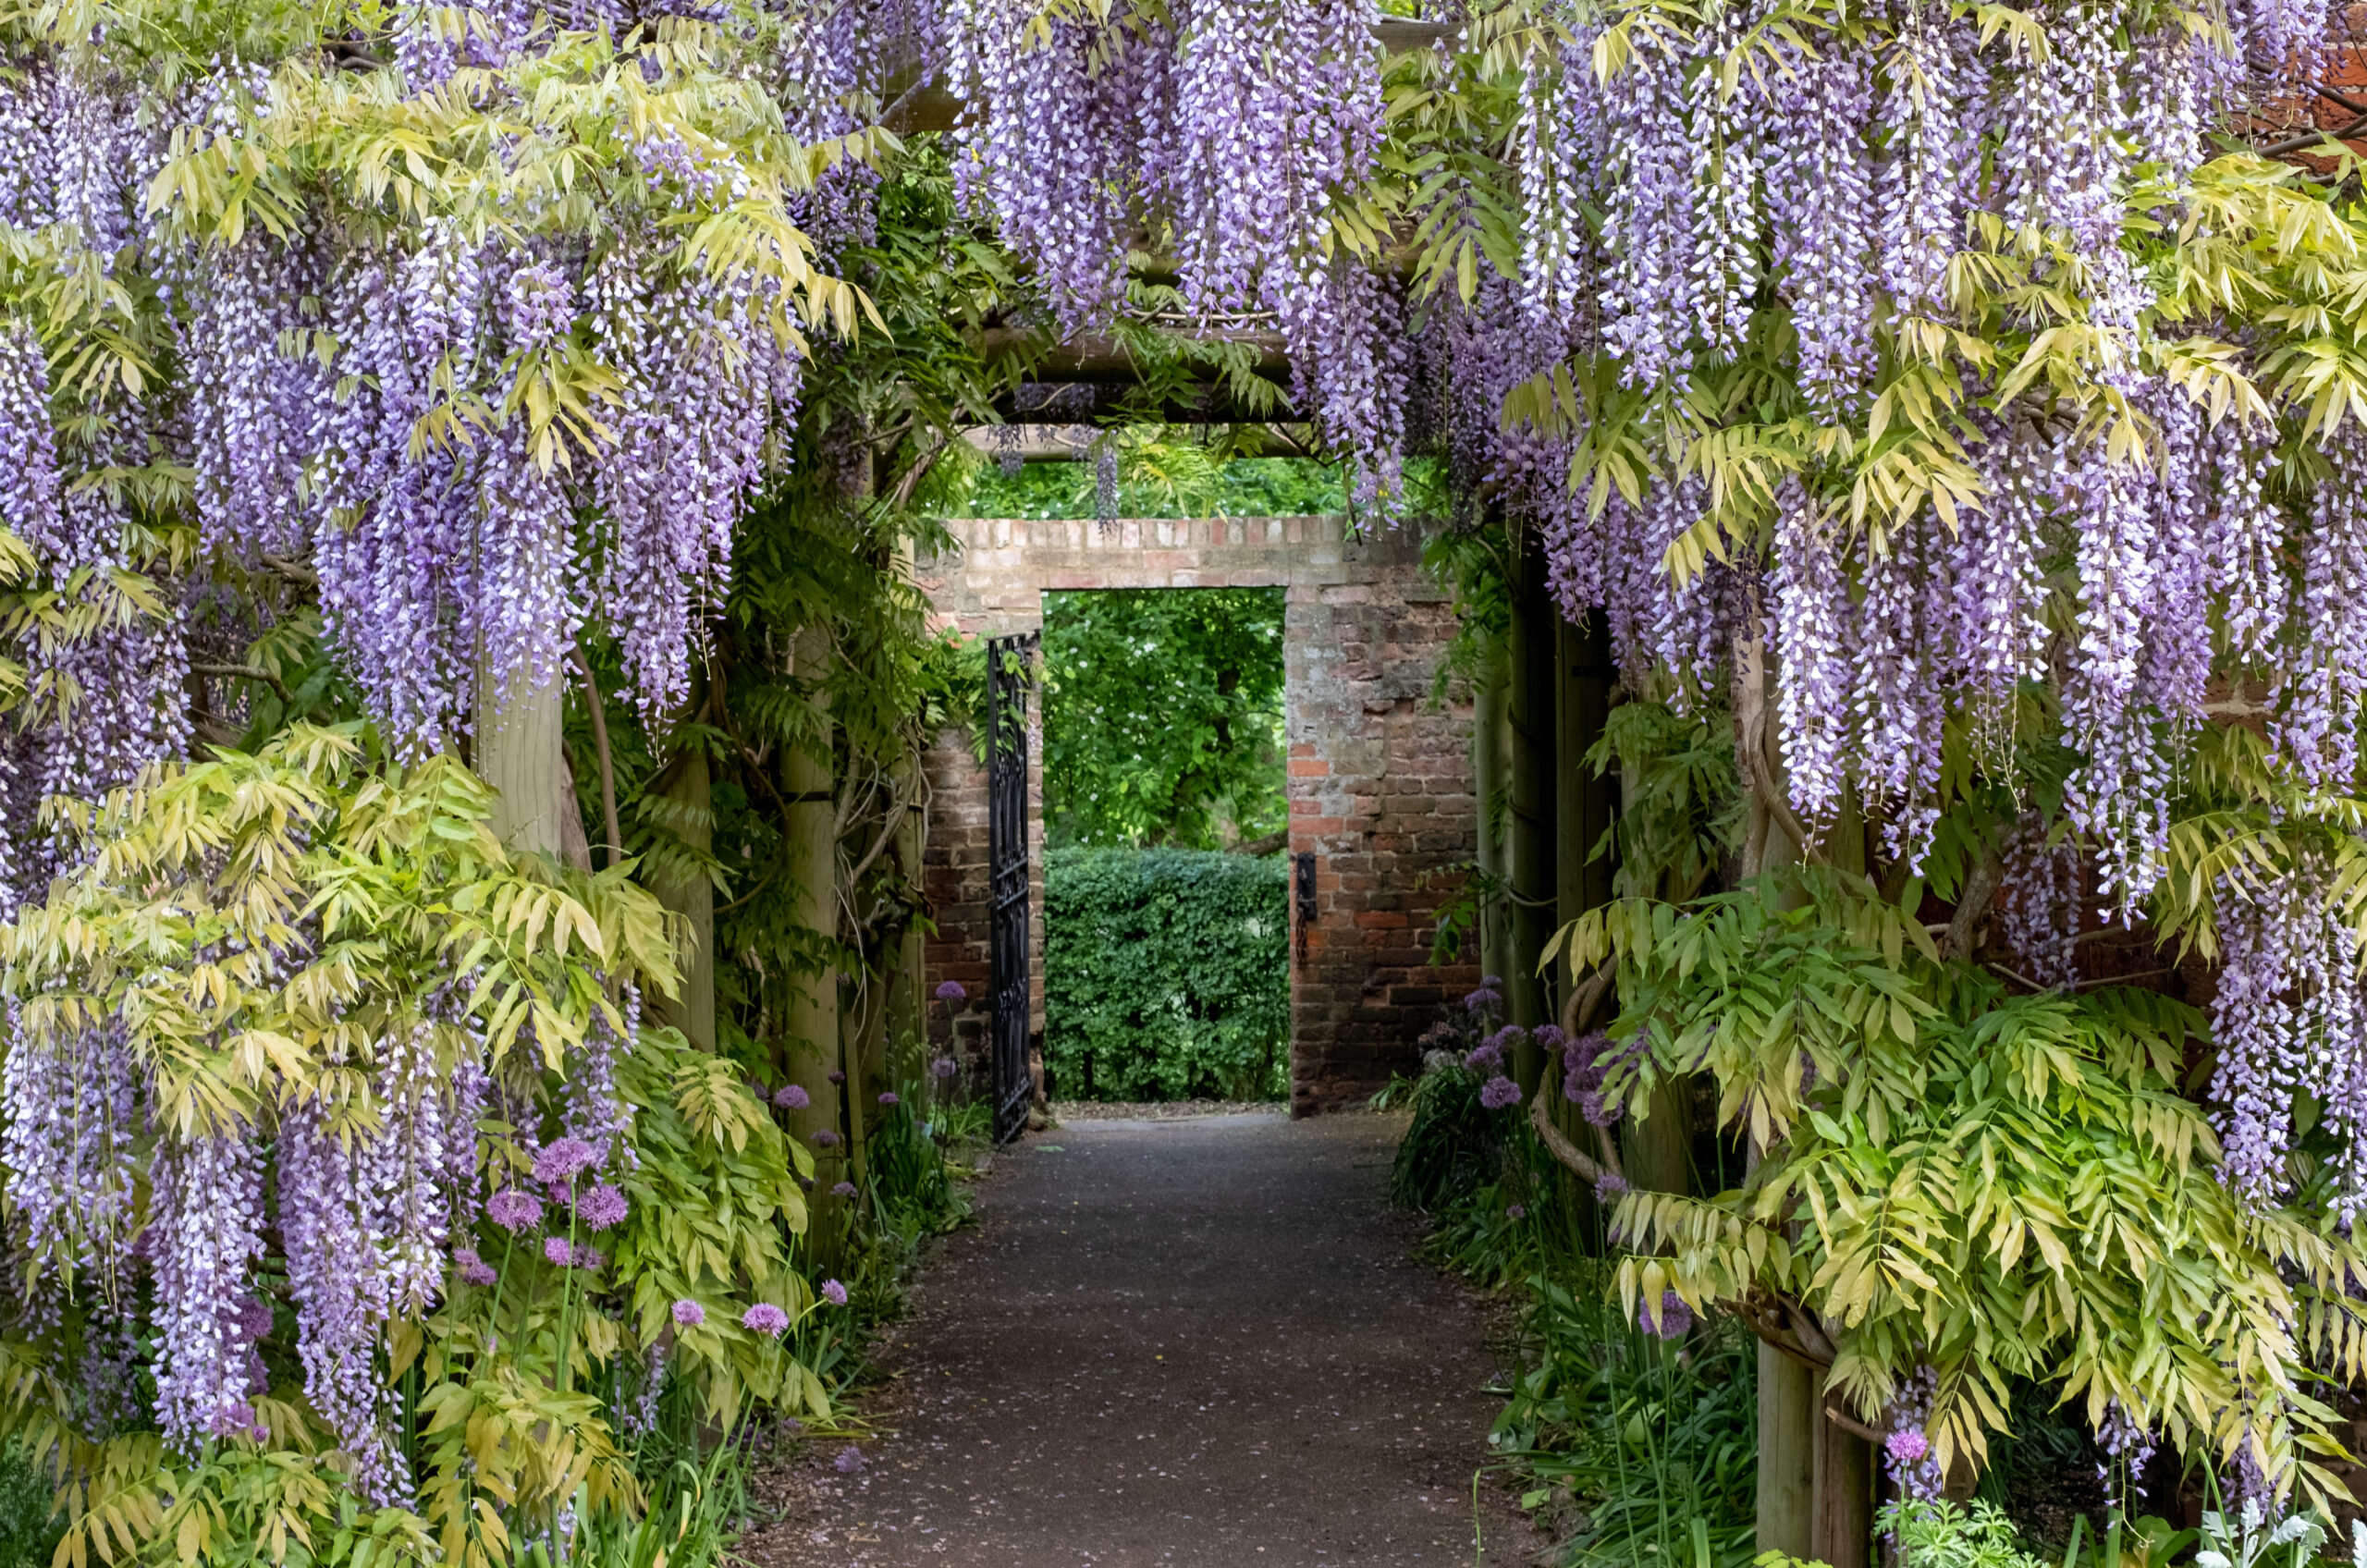 Wisteria tunnel at Eastcote House Gardens, London Borough of Hillingdon. Photographed on a sunny day in mid May when the purple flowers are in full bloom.